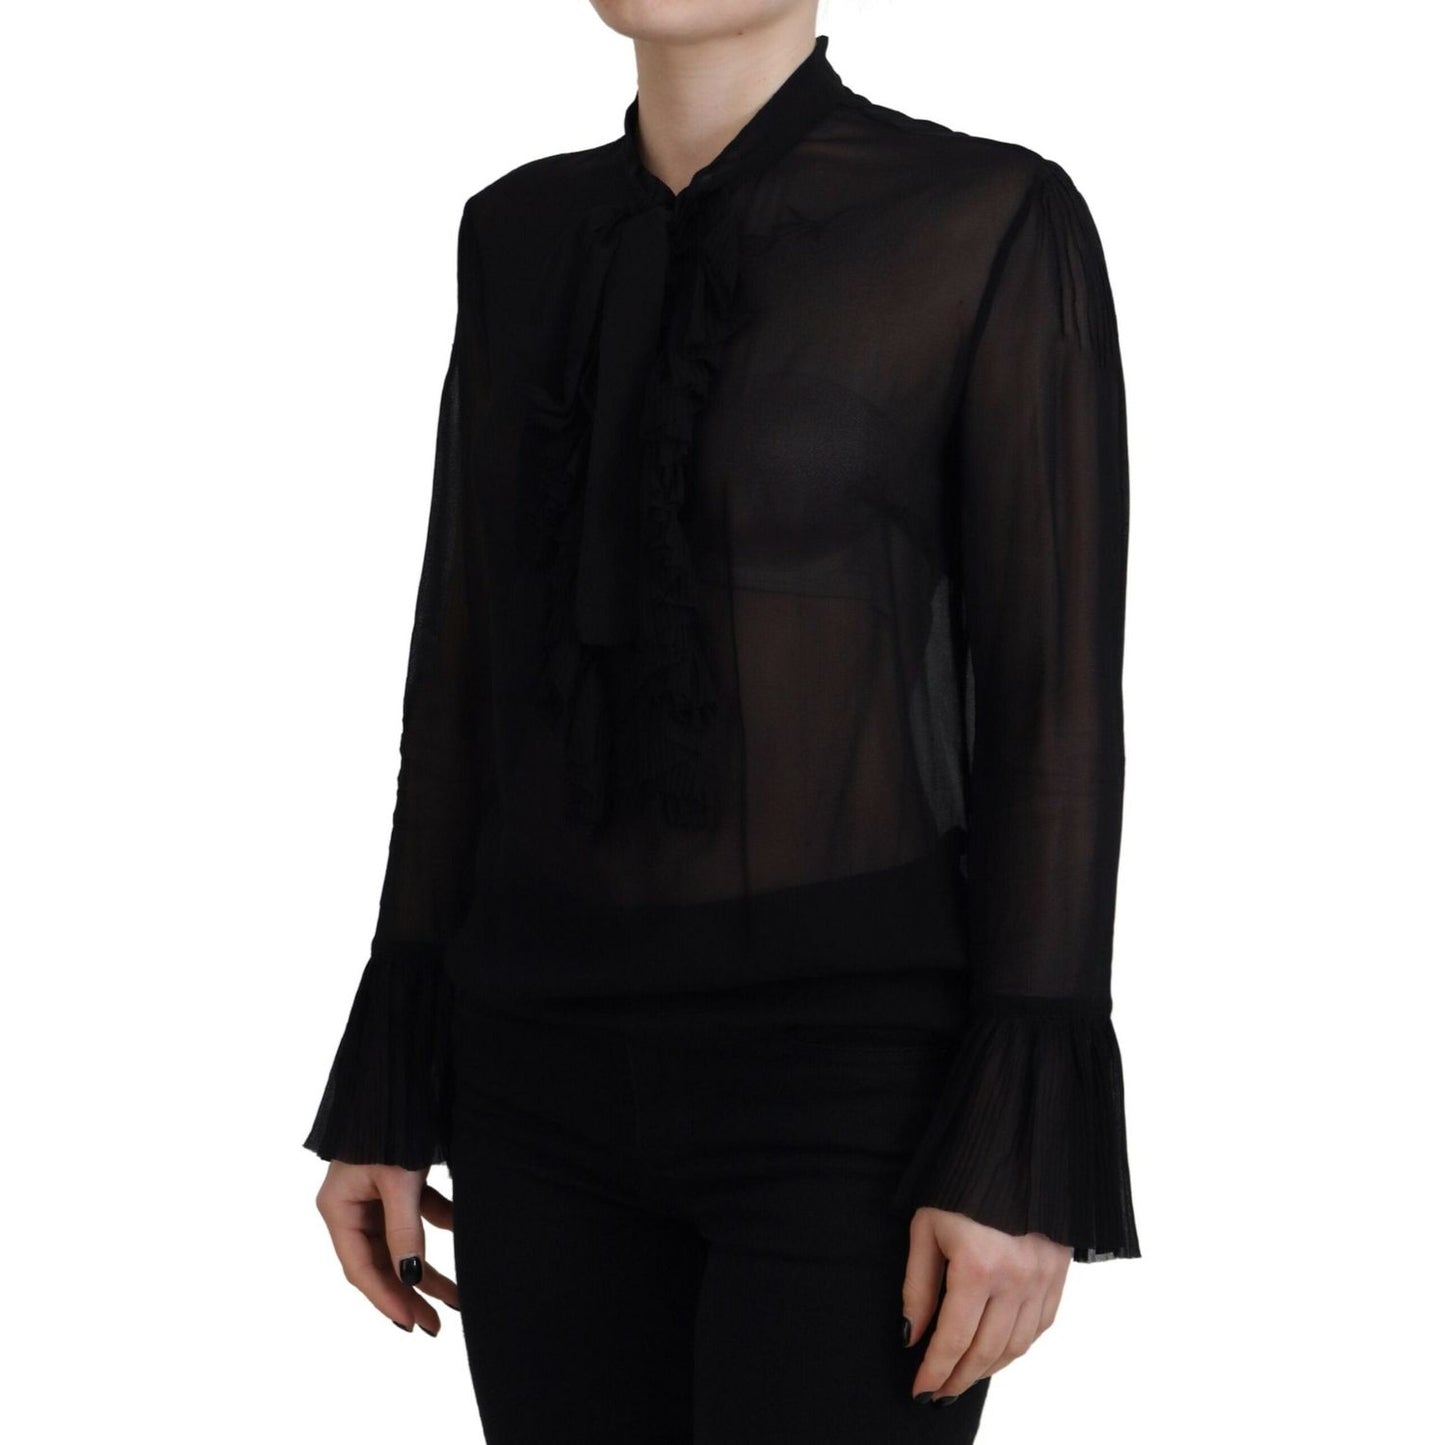 Dsquared² Black Viscose Long Sleeves See Through Blouse Top black-viscose-long-sleeves-see-through-blouse-top